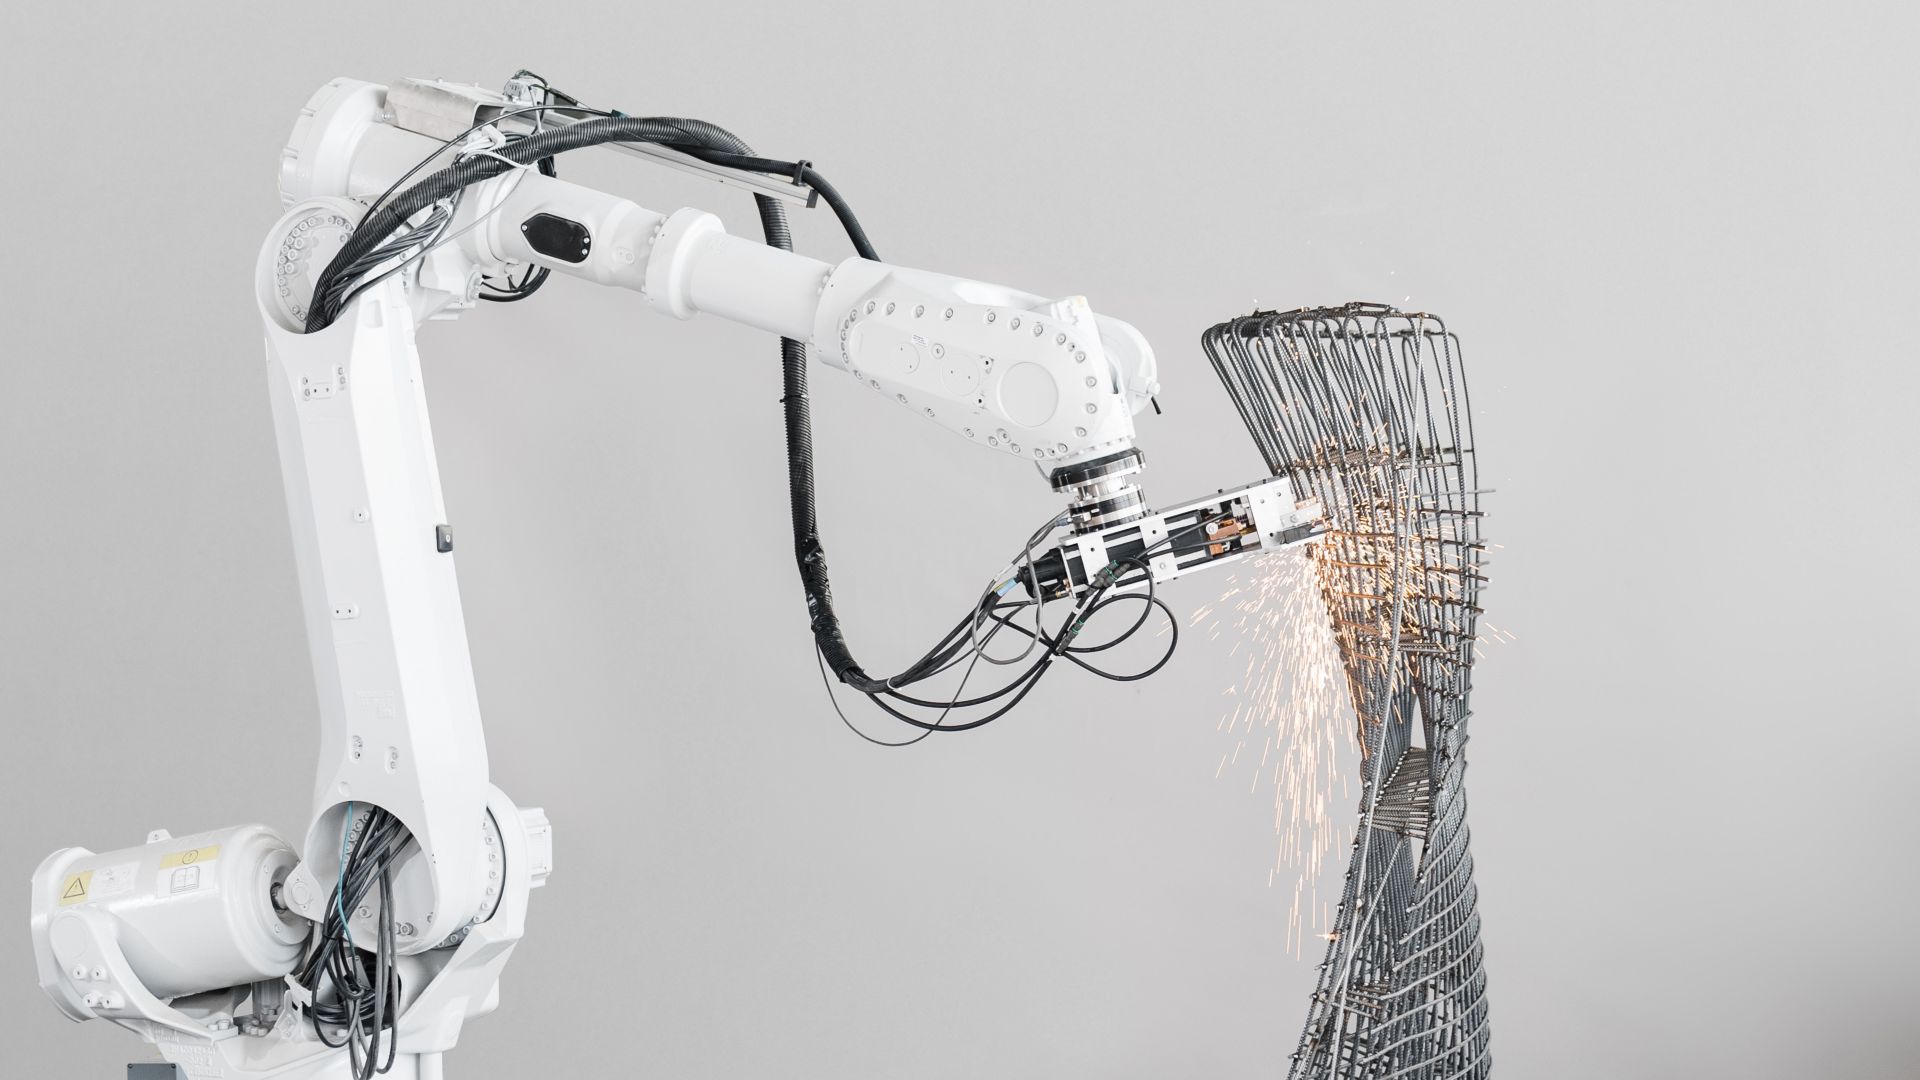 World’s first robot-assisted technology that allows complex reinforced concrete structures to be produced without formwork